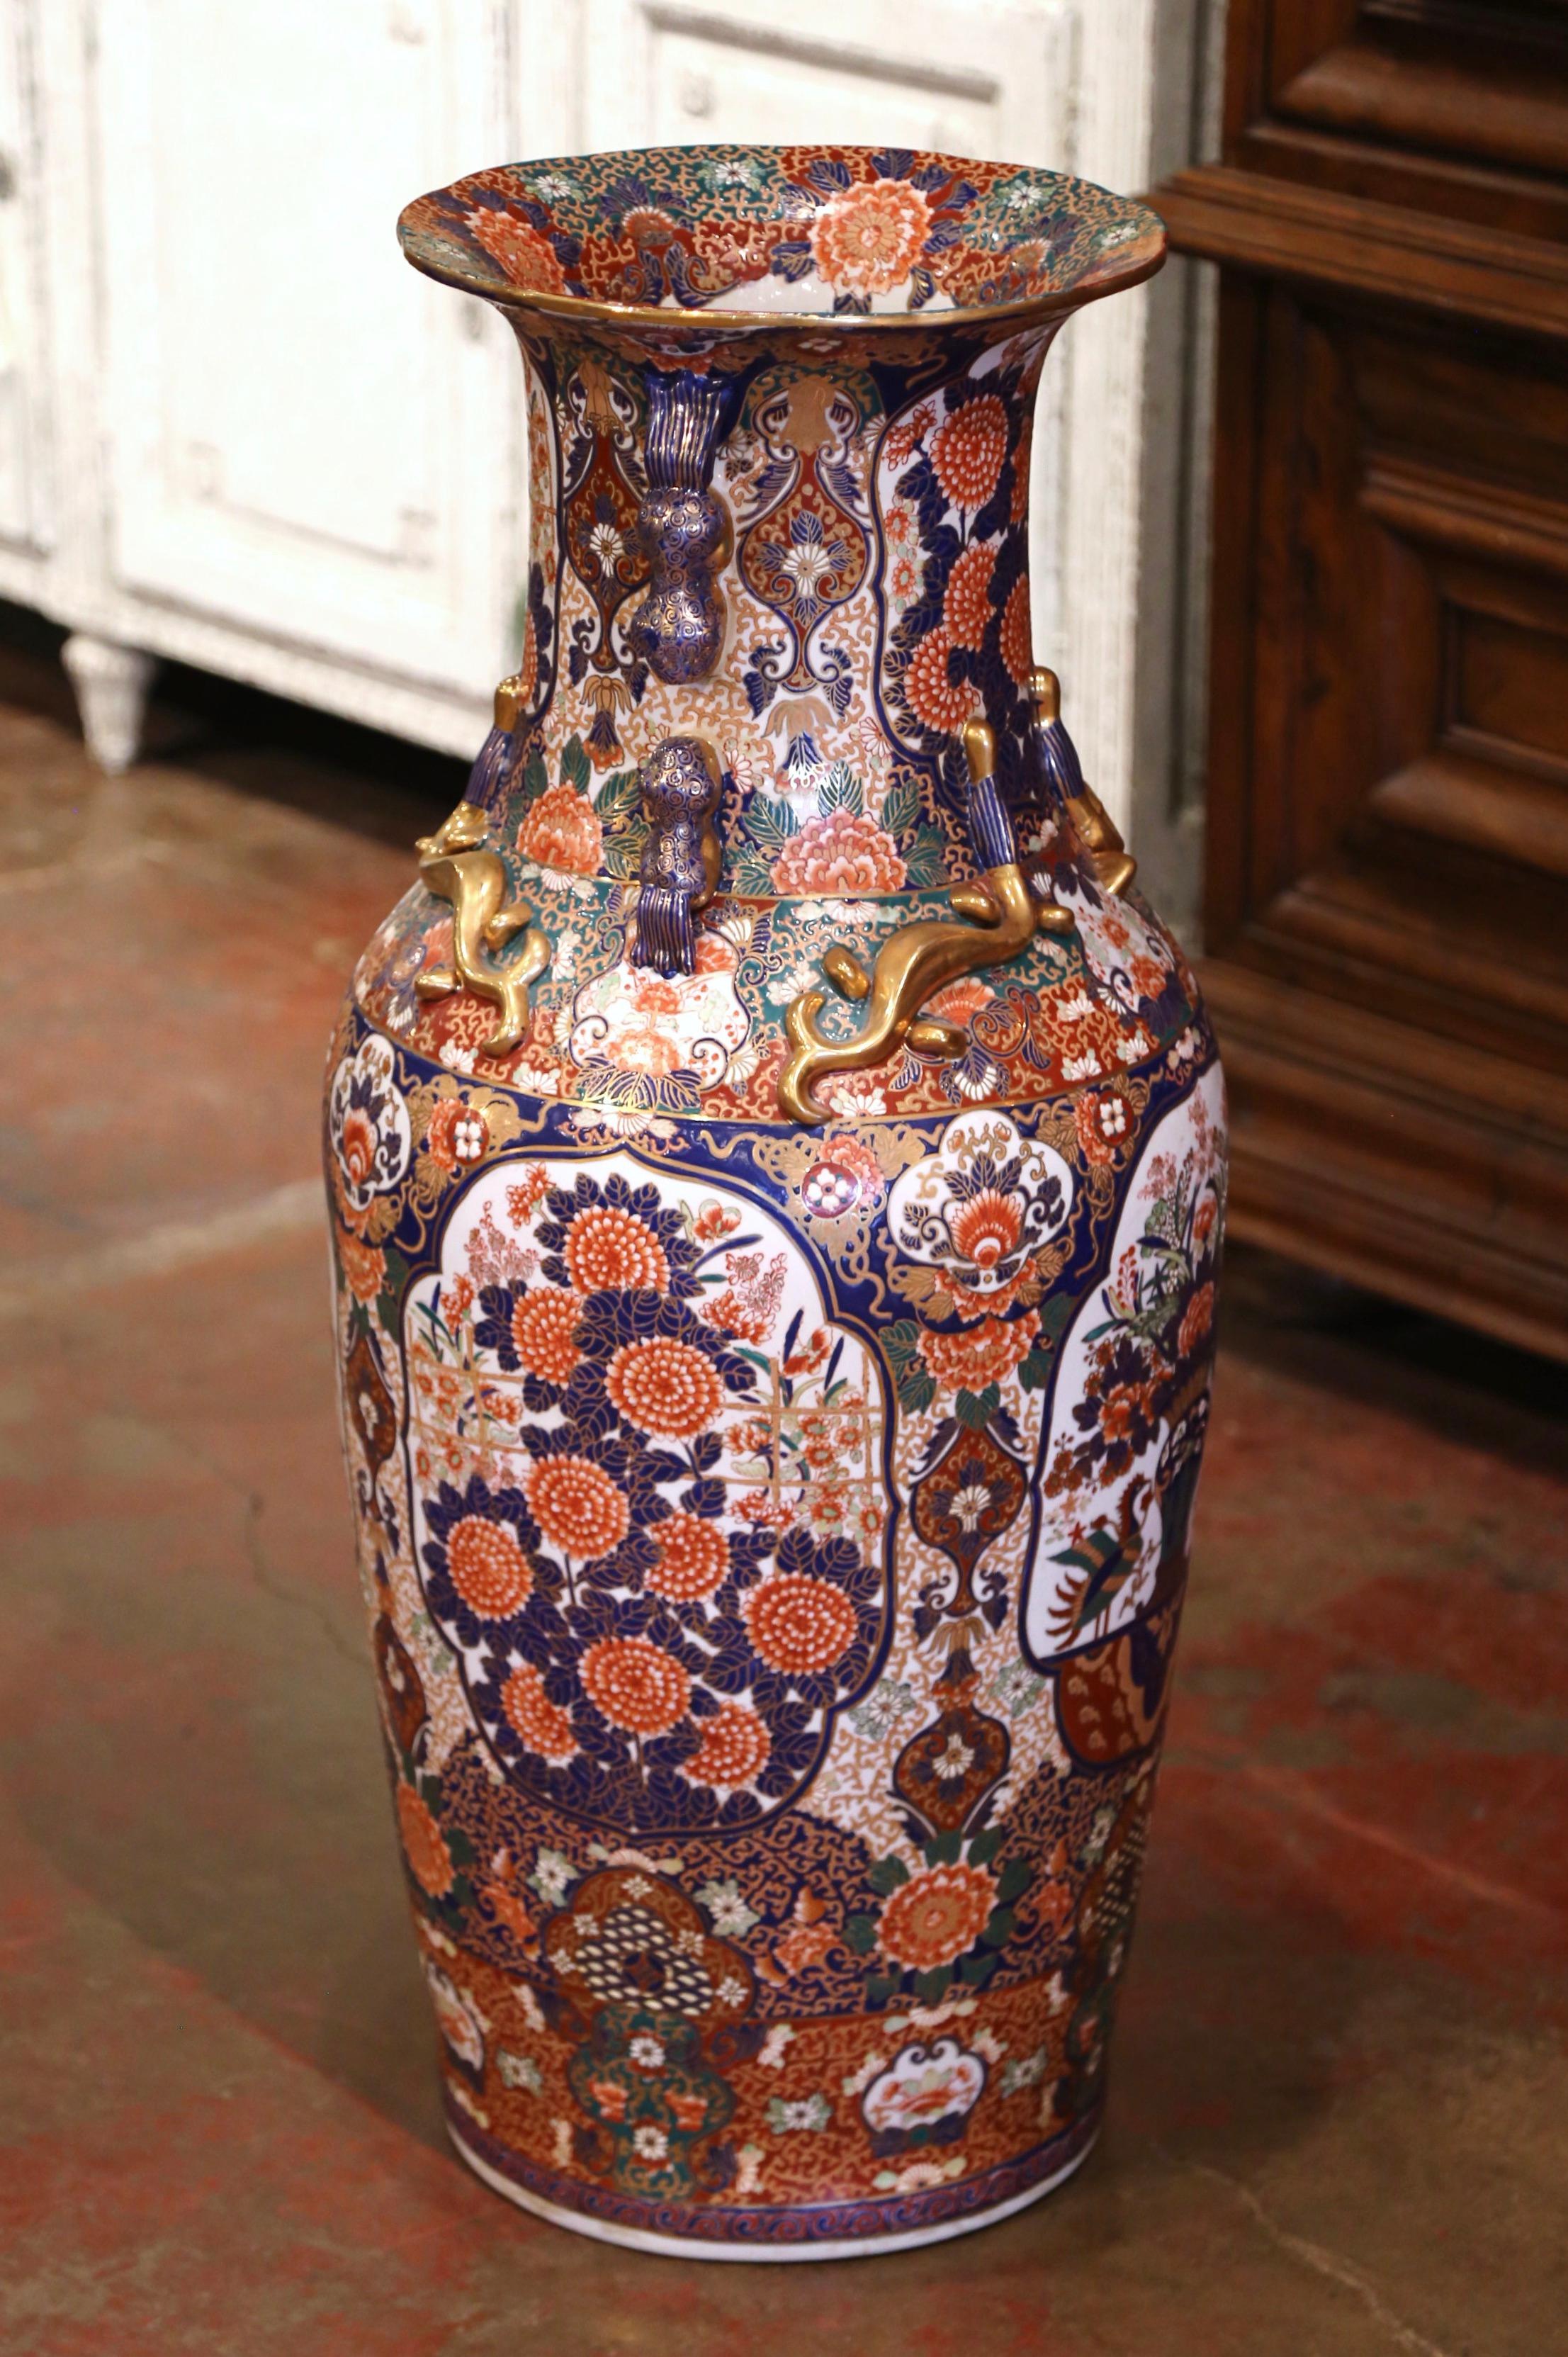 Crafted in China circa 1920, the tall Family Rose vase is round in shaped with an elegant long neck decorated with gilt Foo Dogs and dragon lizards in high relief. The colorful antique urn features hand painted flower vases medallions and floral